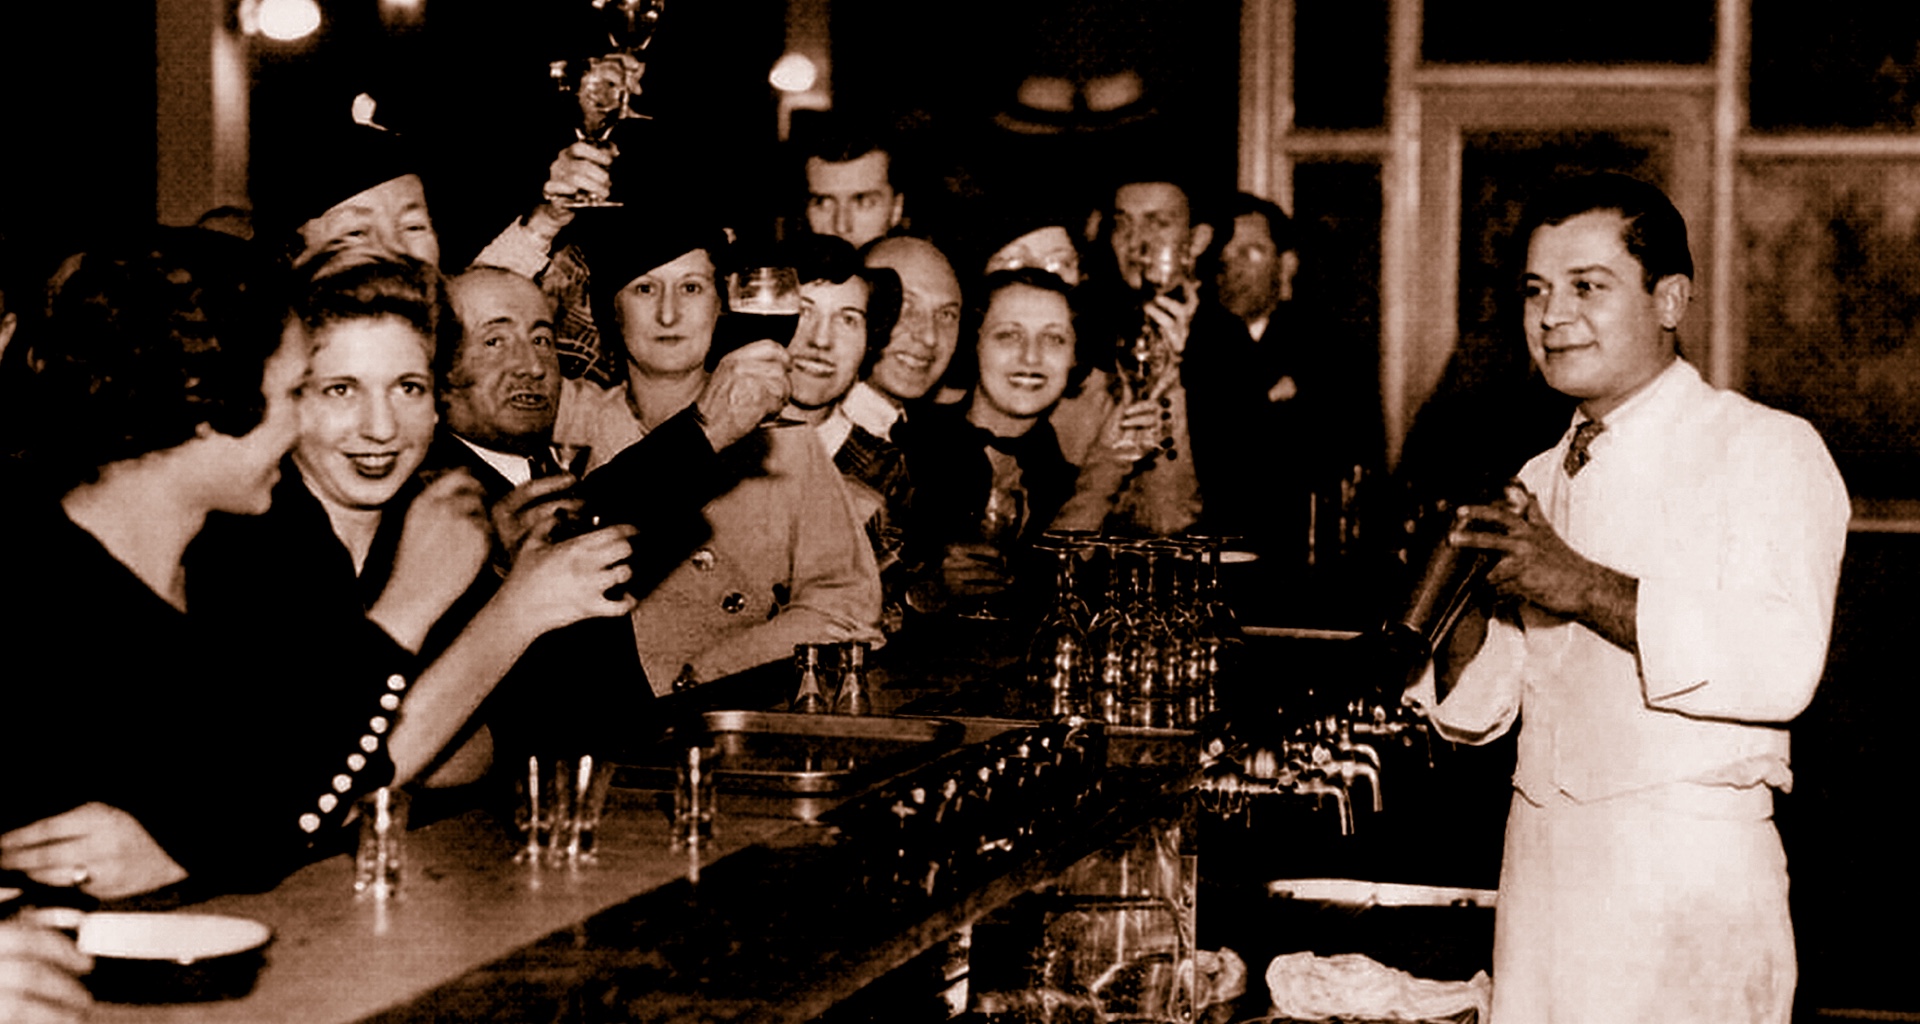 Prohibition Bar Photo From Savannah Museum Collection